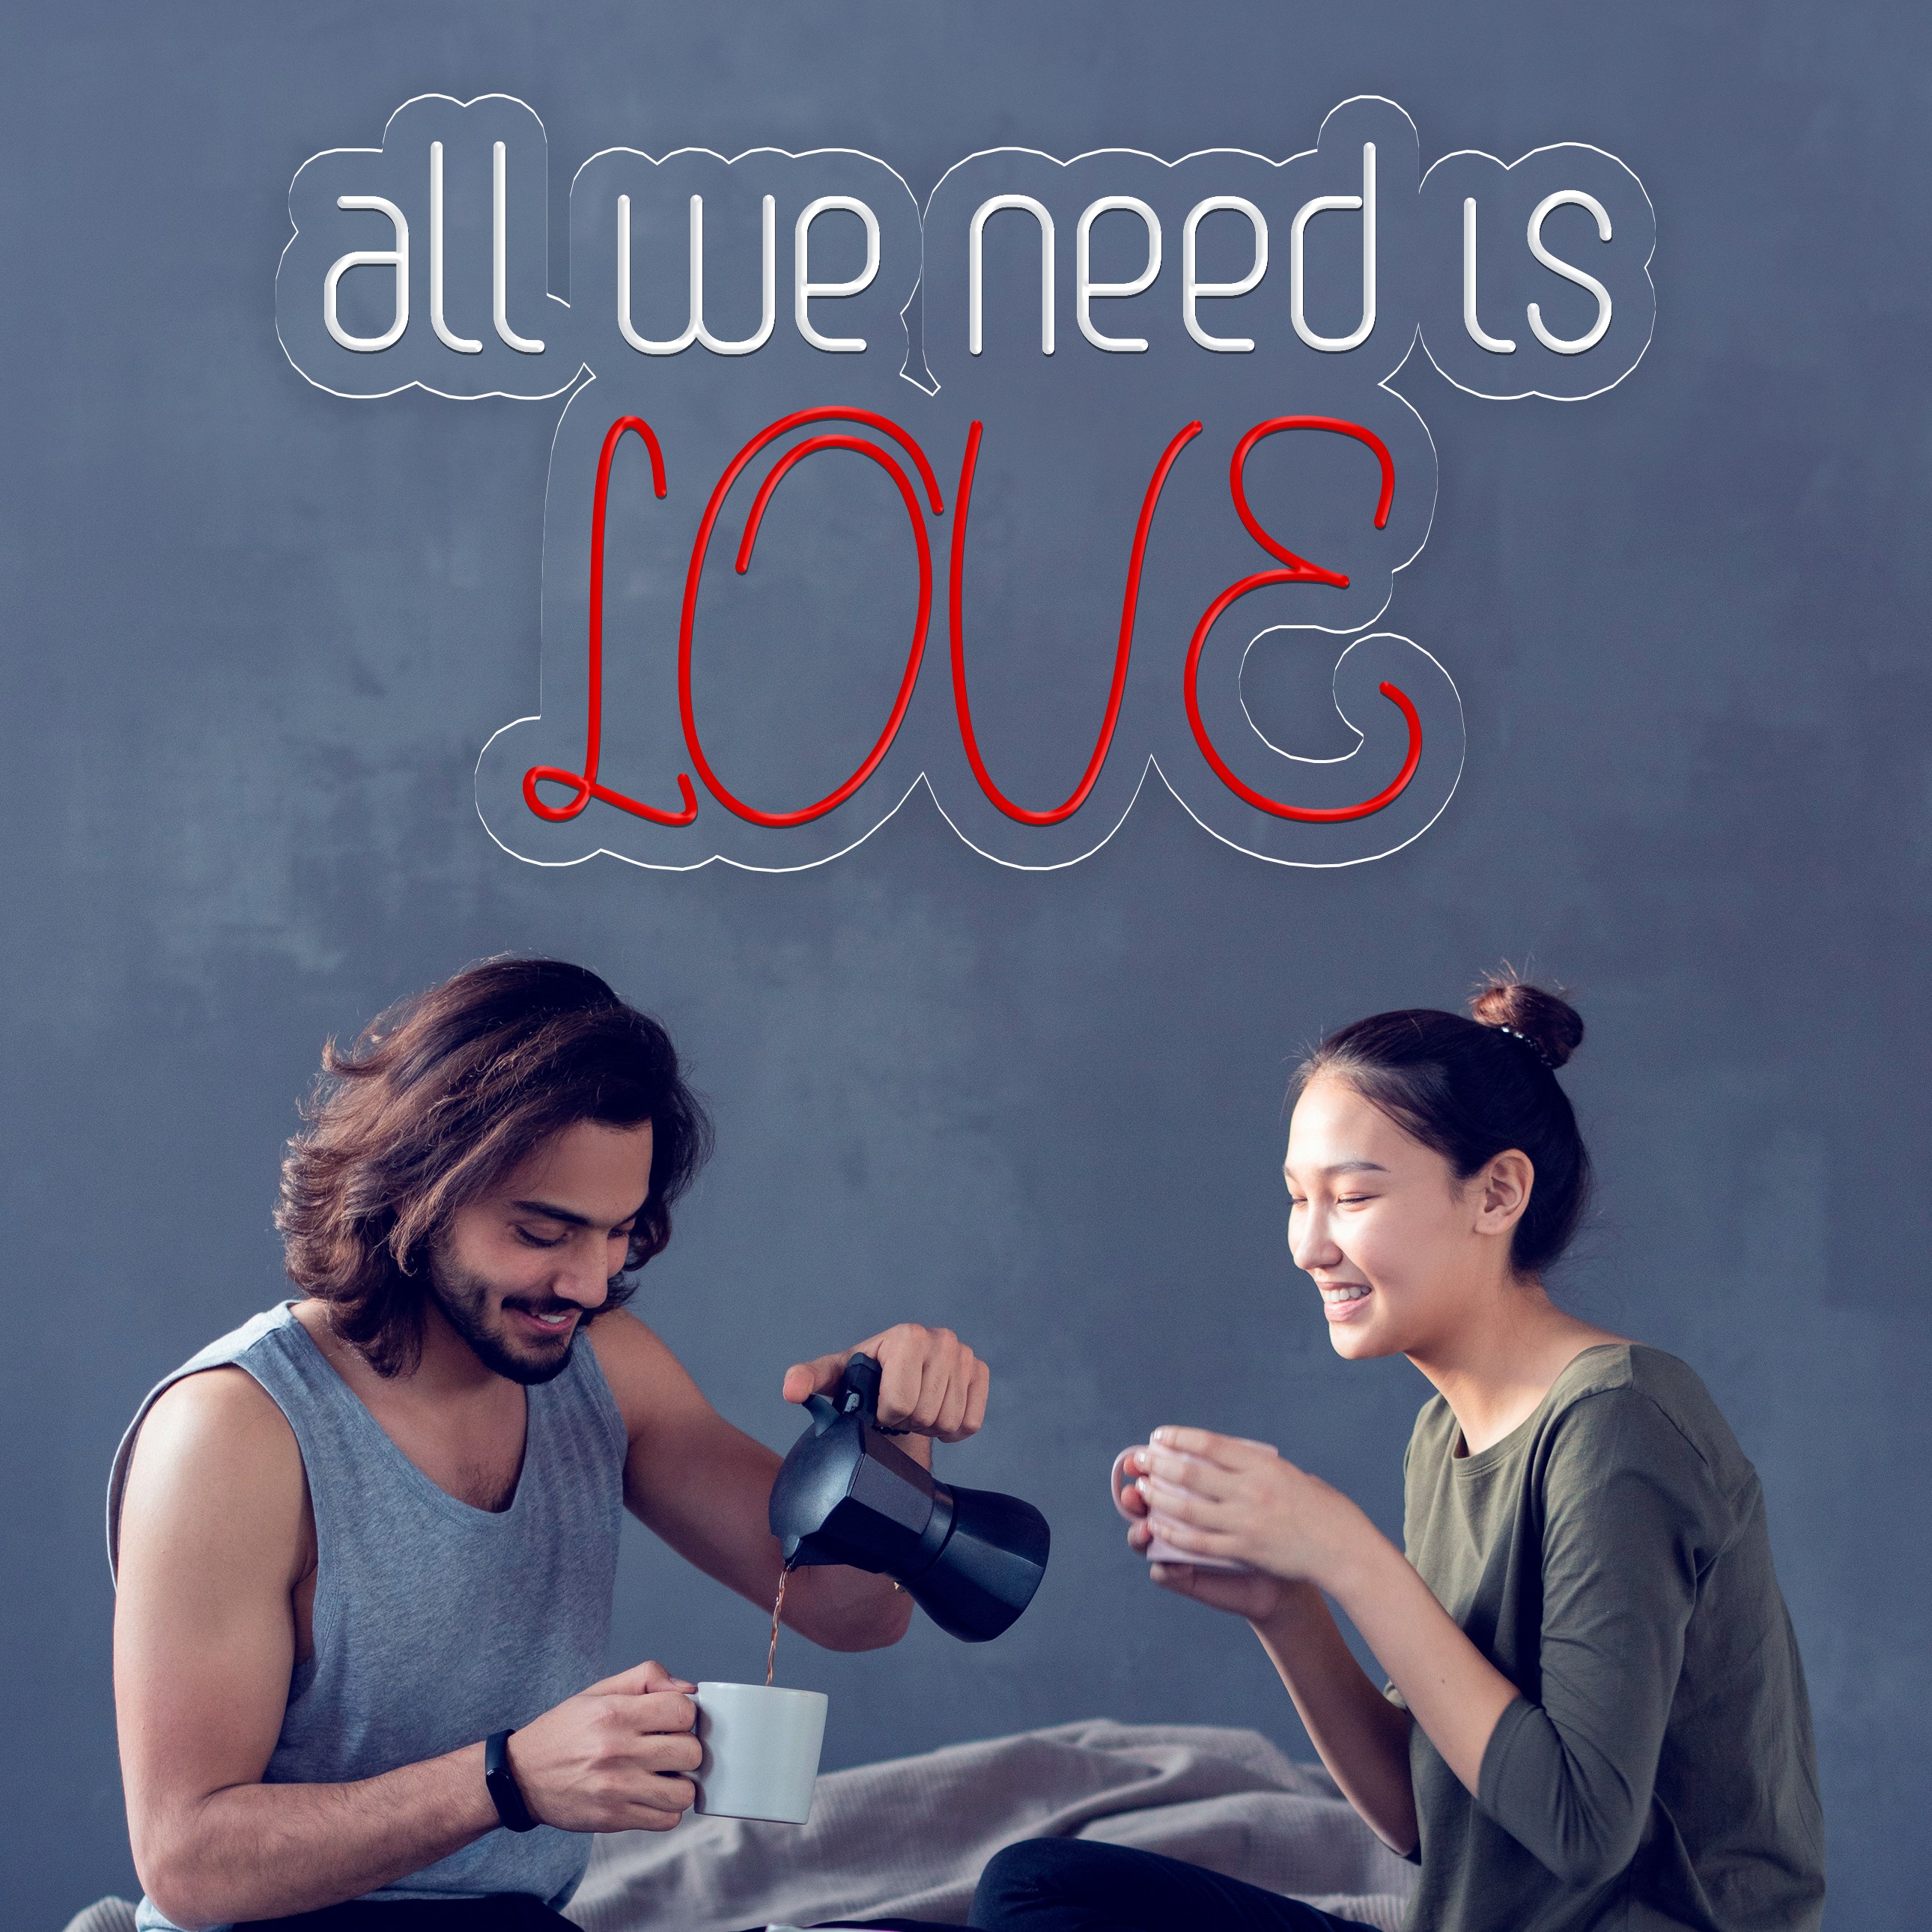 Picture of "All we need is love" Neon Sign